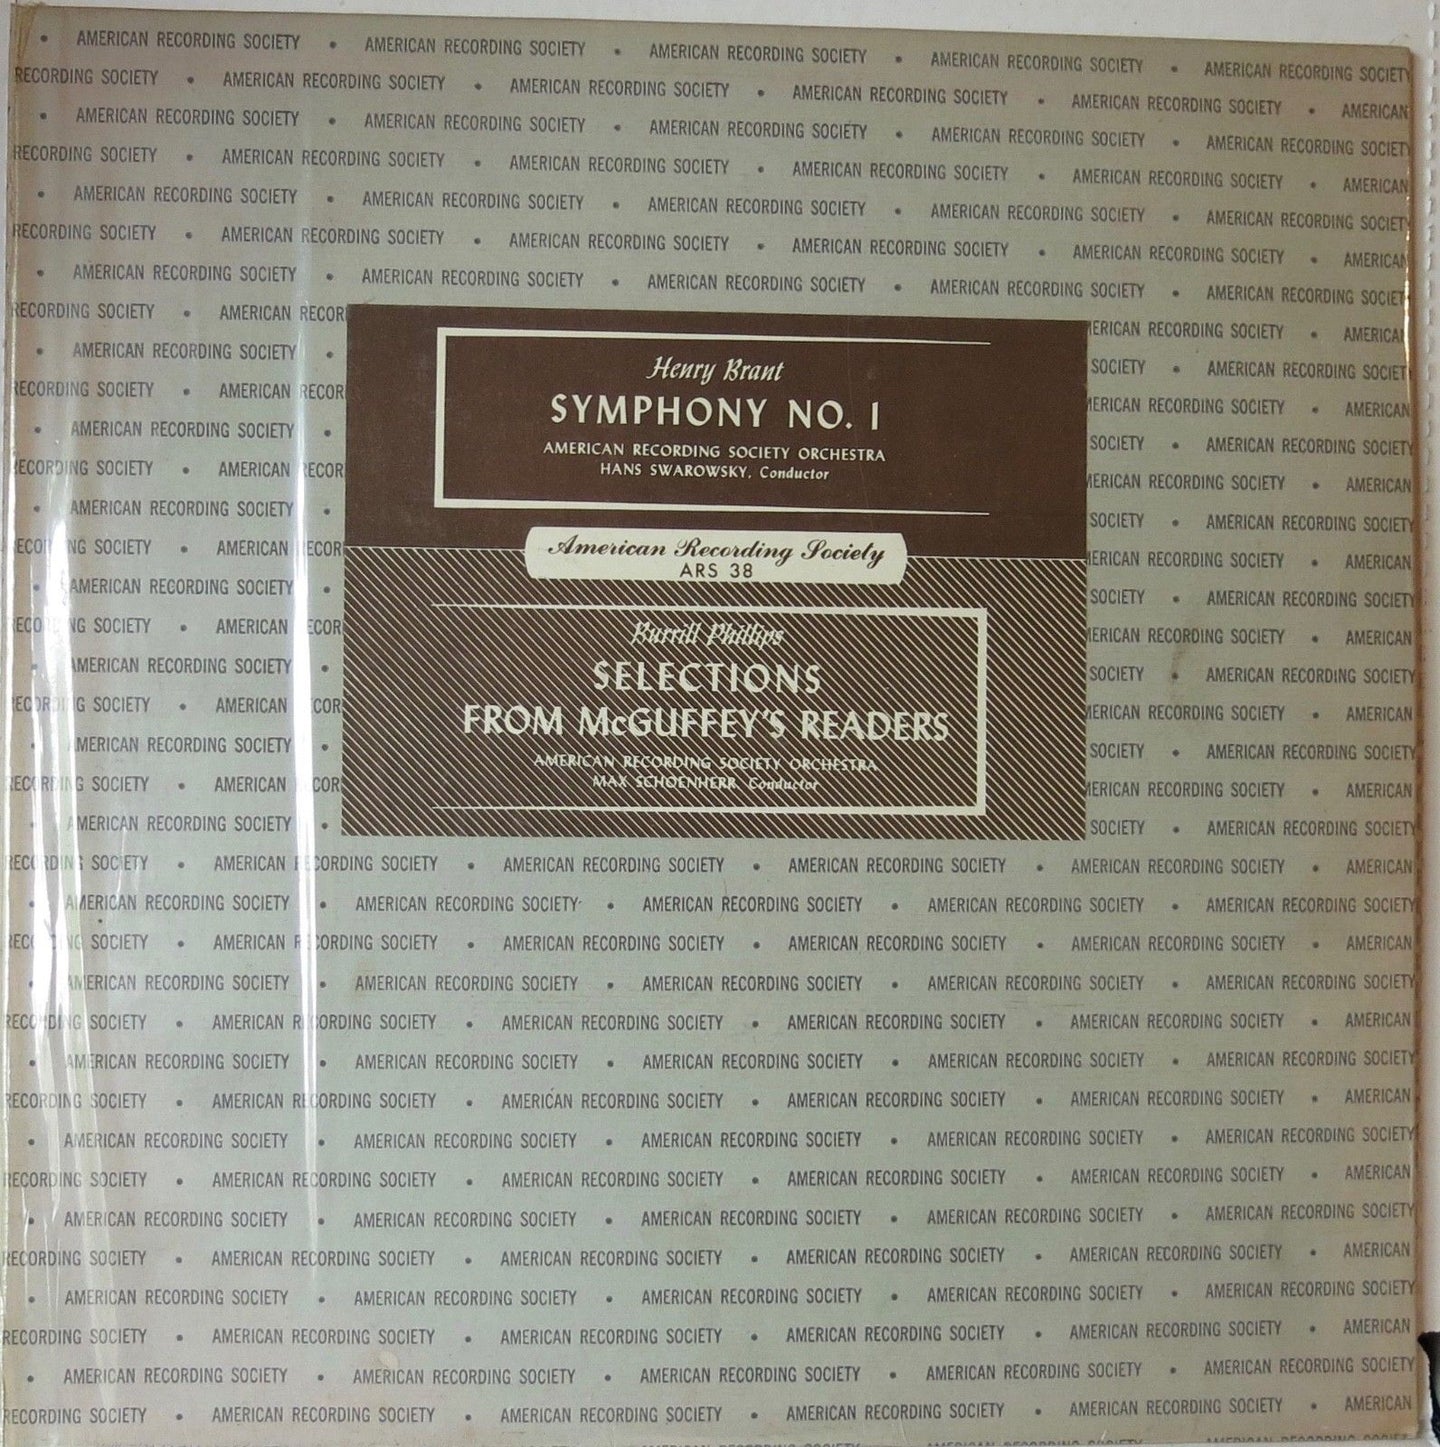 Henry Brant, Burrill Phillips ‎– Symphony No. 1 / Selections From McGuffey's Readers - American Recording Society